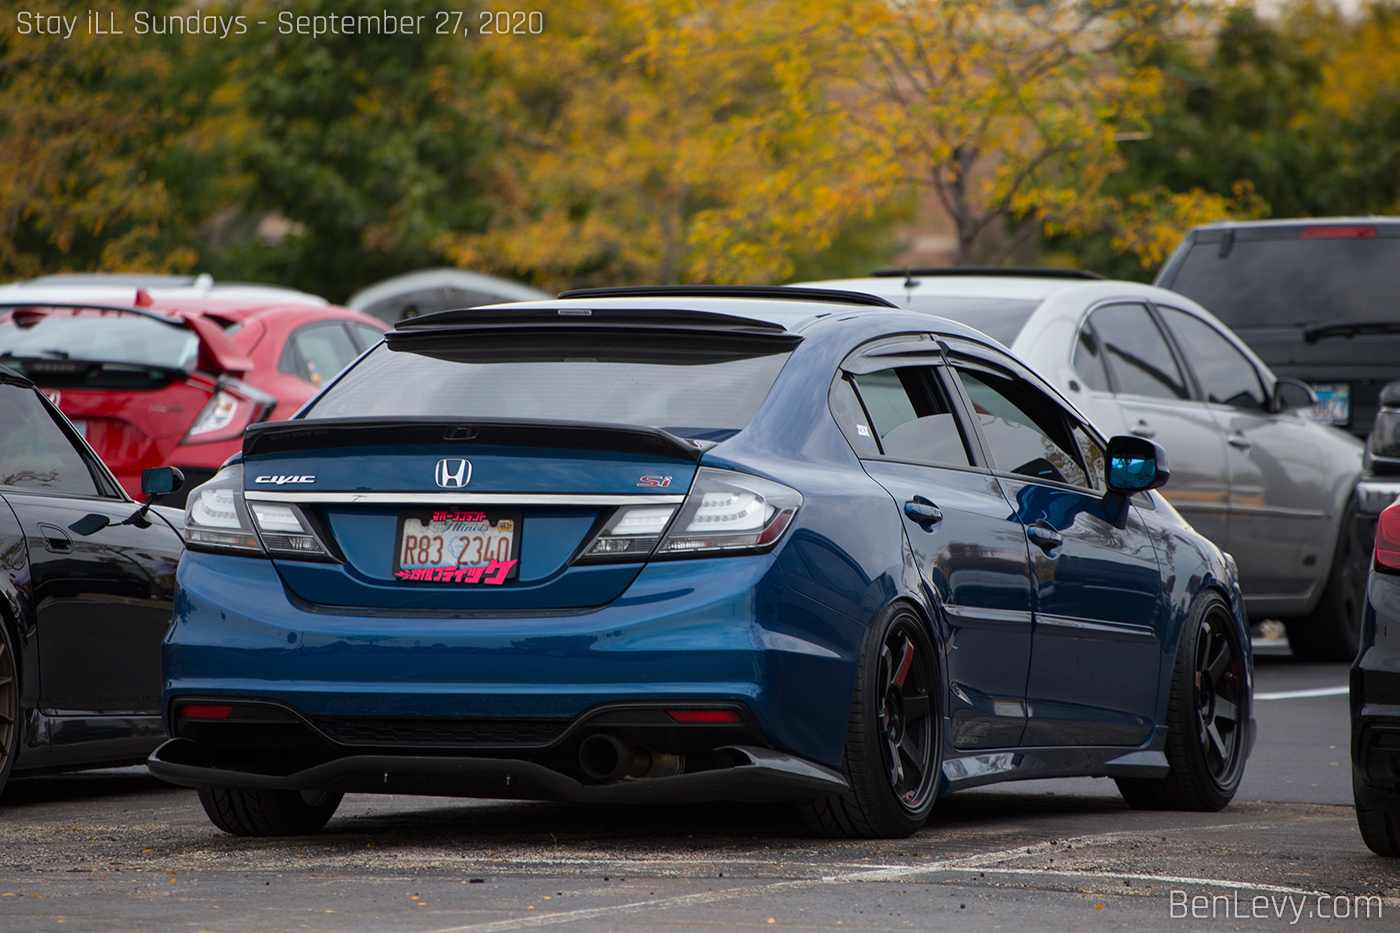 Blue Civic Si with clear tails